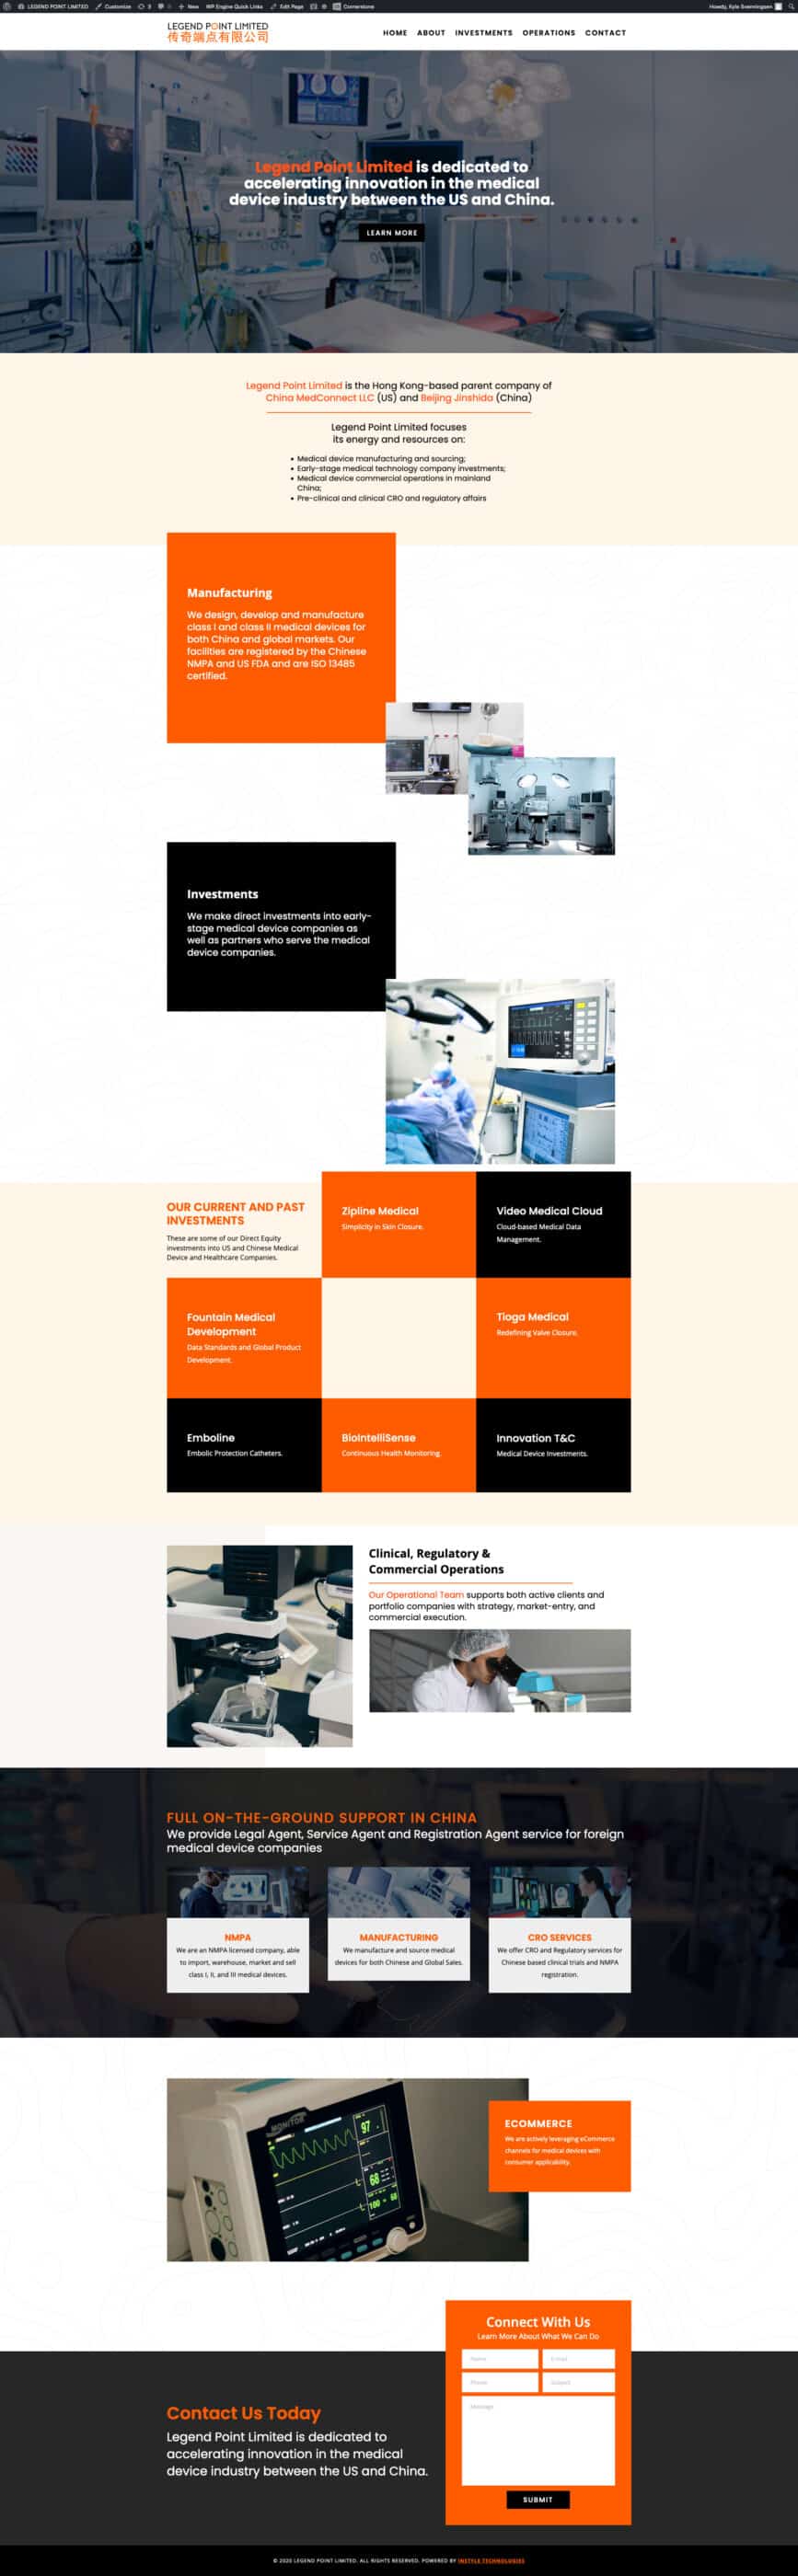 Legend Point Limited homepage showing medical equipment and doctors.